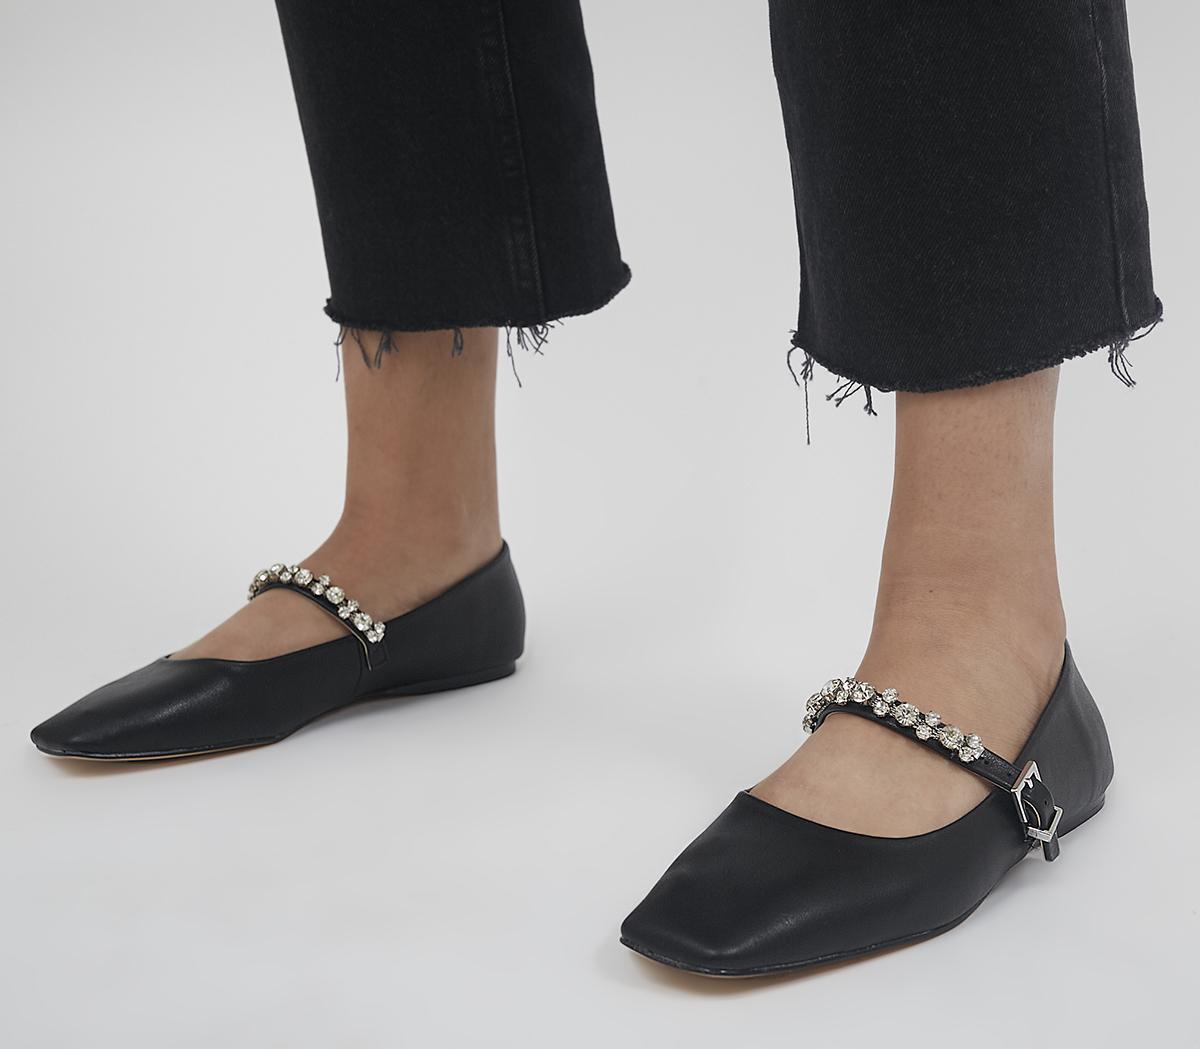 Formerly Soft Square Mary Jane Flats